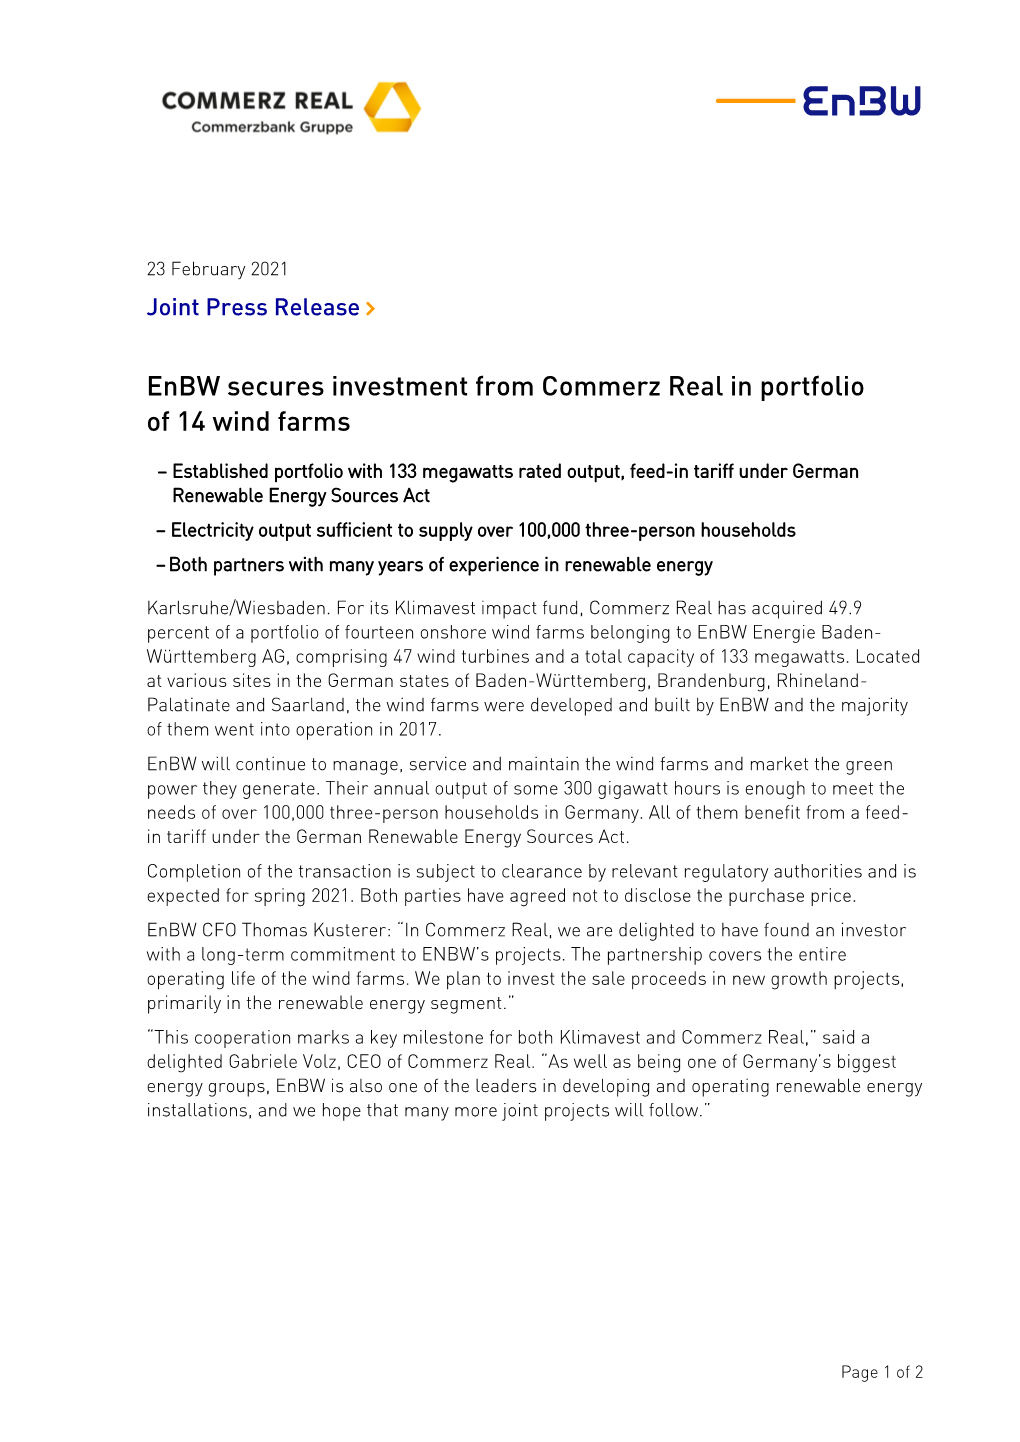 Enbw Secures Investment from Commerz Real in Portfolio of 14 Wind Farms